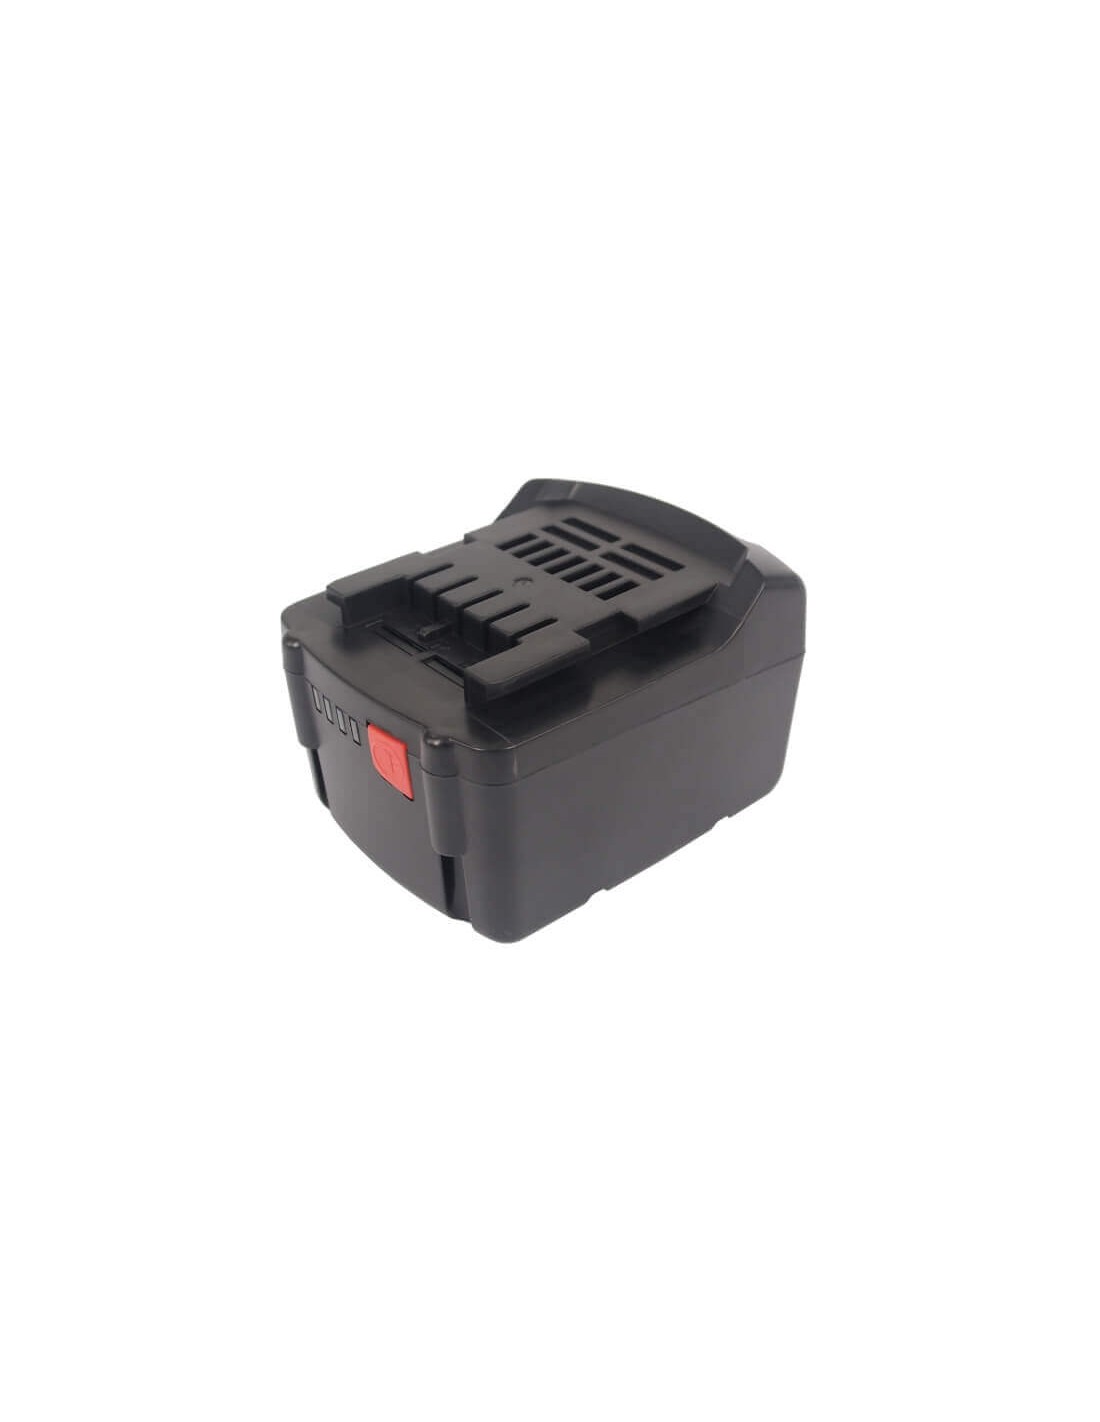 Battery for Metabo Bs 14.4 6.02105.50, Bs 14.4 6.02105.51, Bs 14.4 Lt Compact 6.02137.55 14.4V, 3000mAh - 43.20Wh